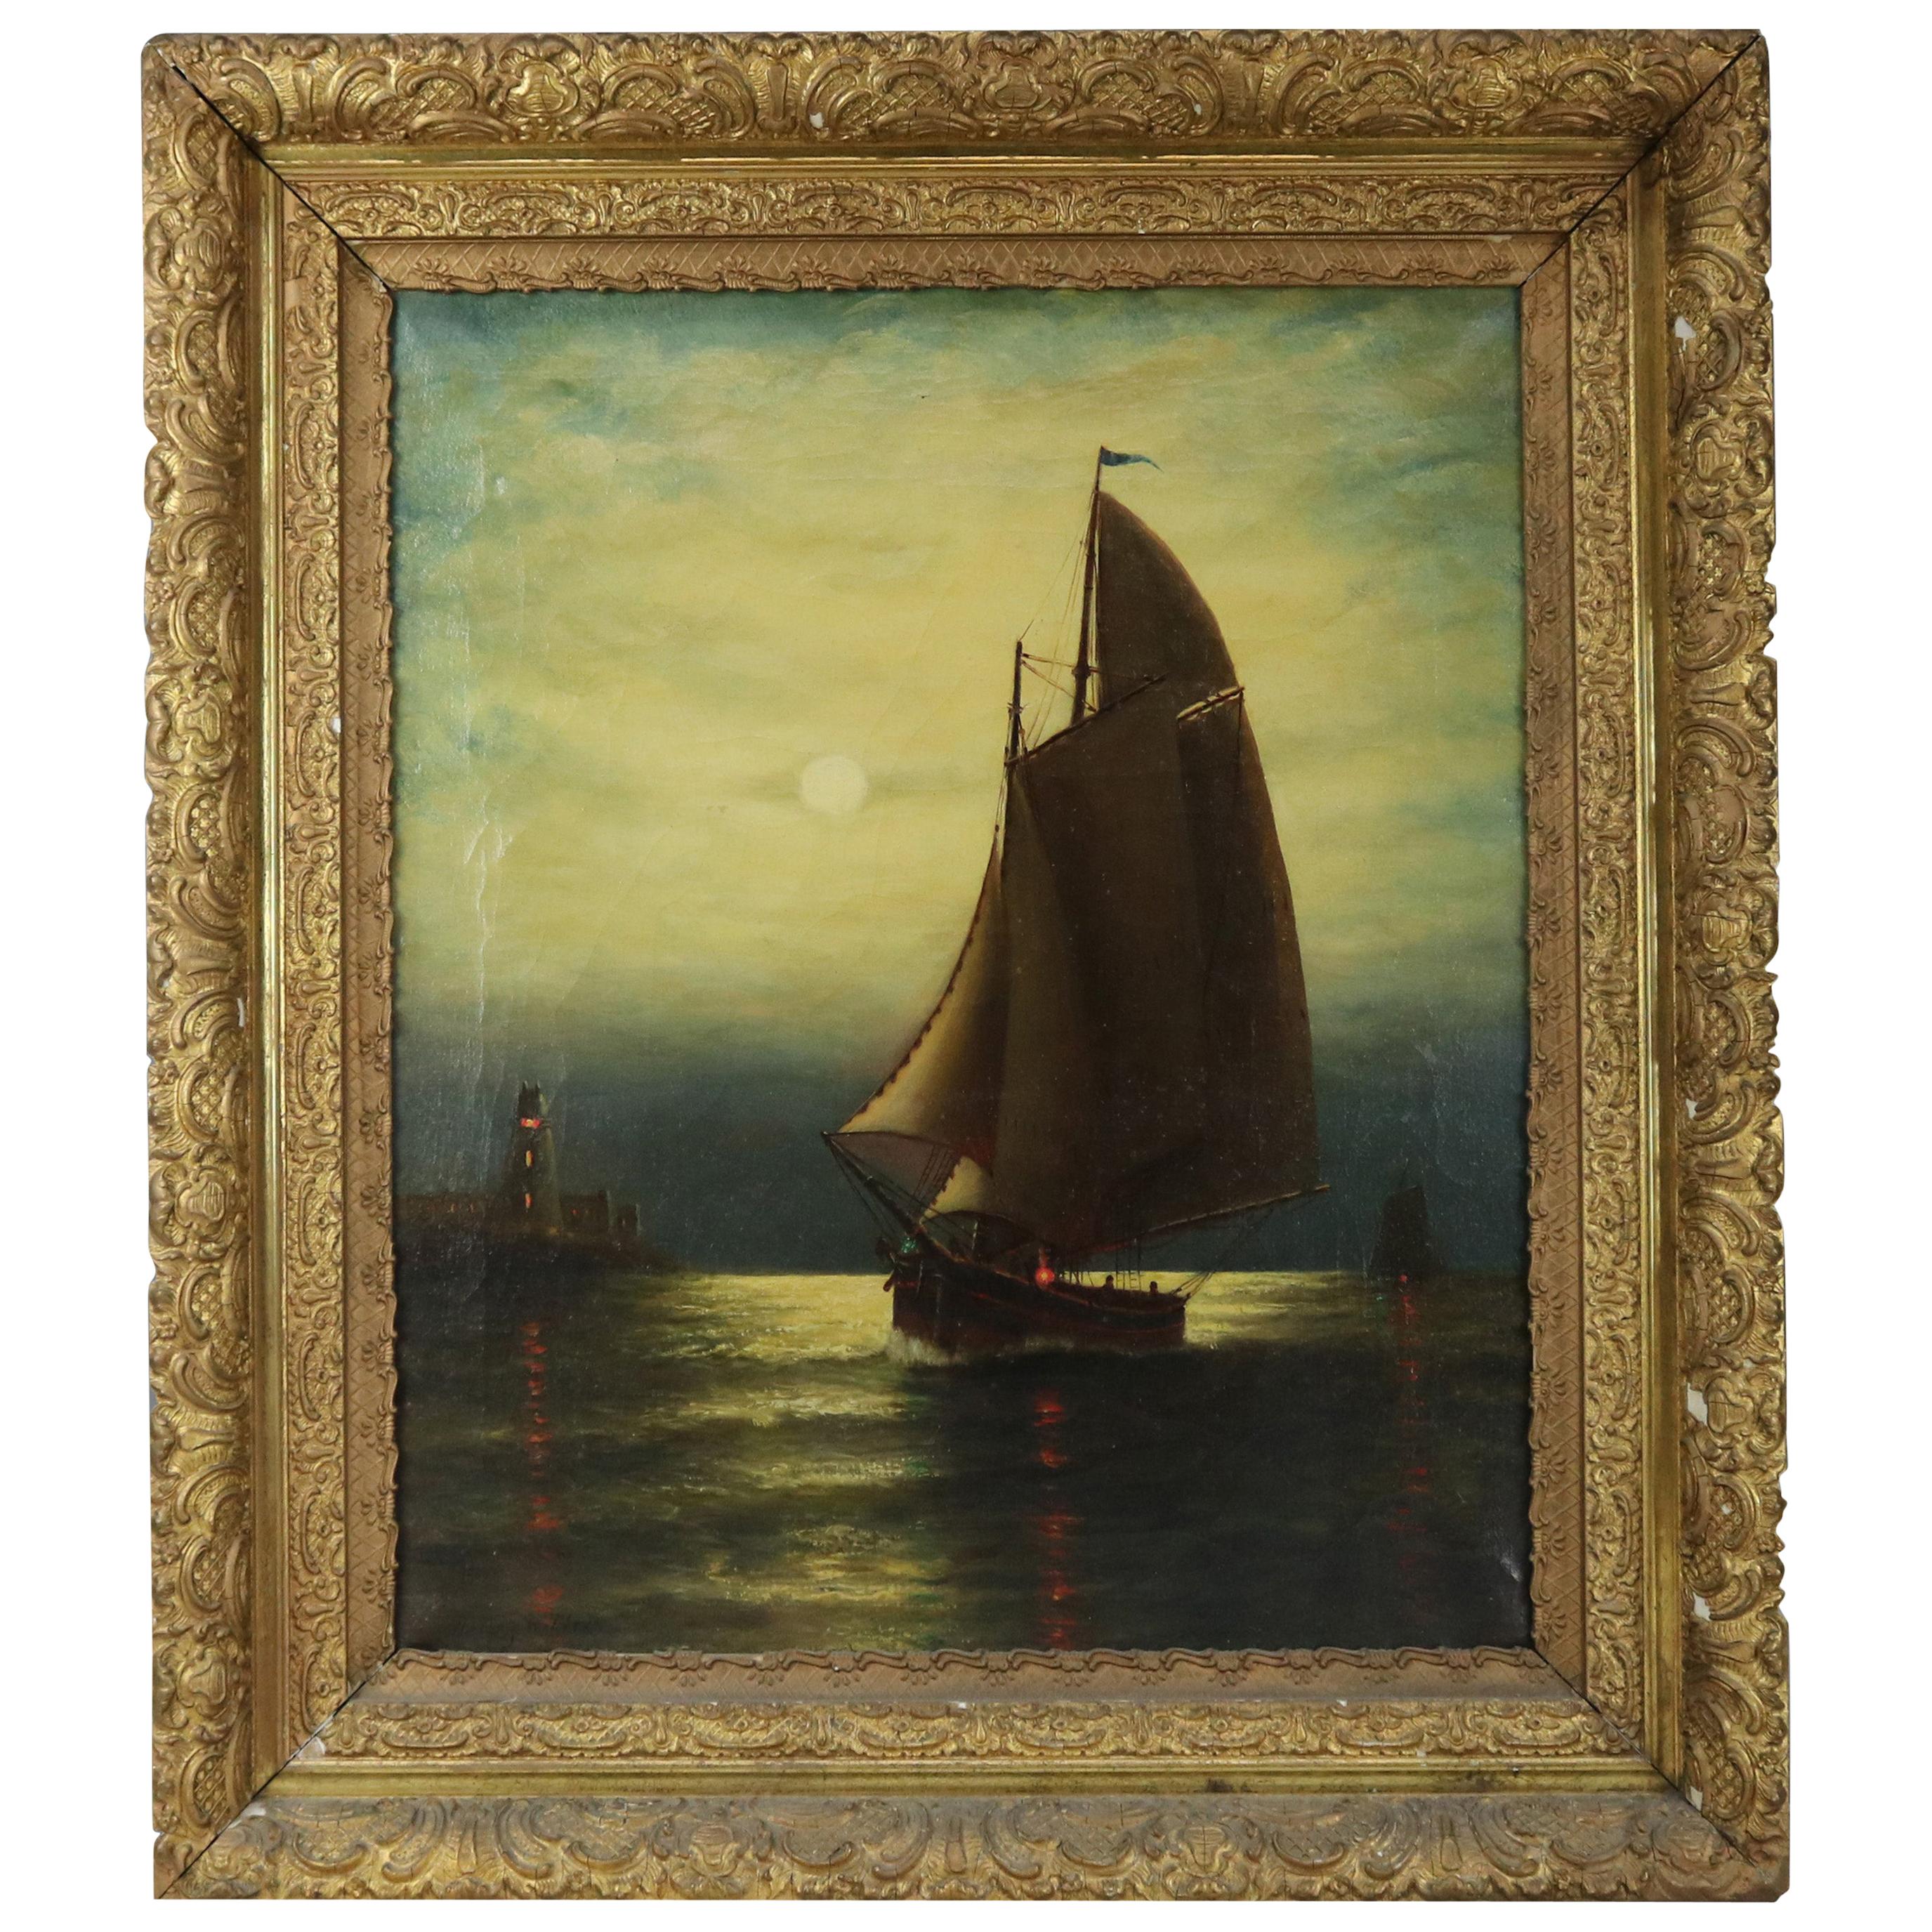 Antique Painting, Seascape with Moonlit Sailboat by Wesley Webber, circa 1900